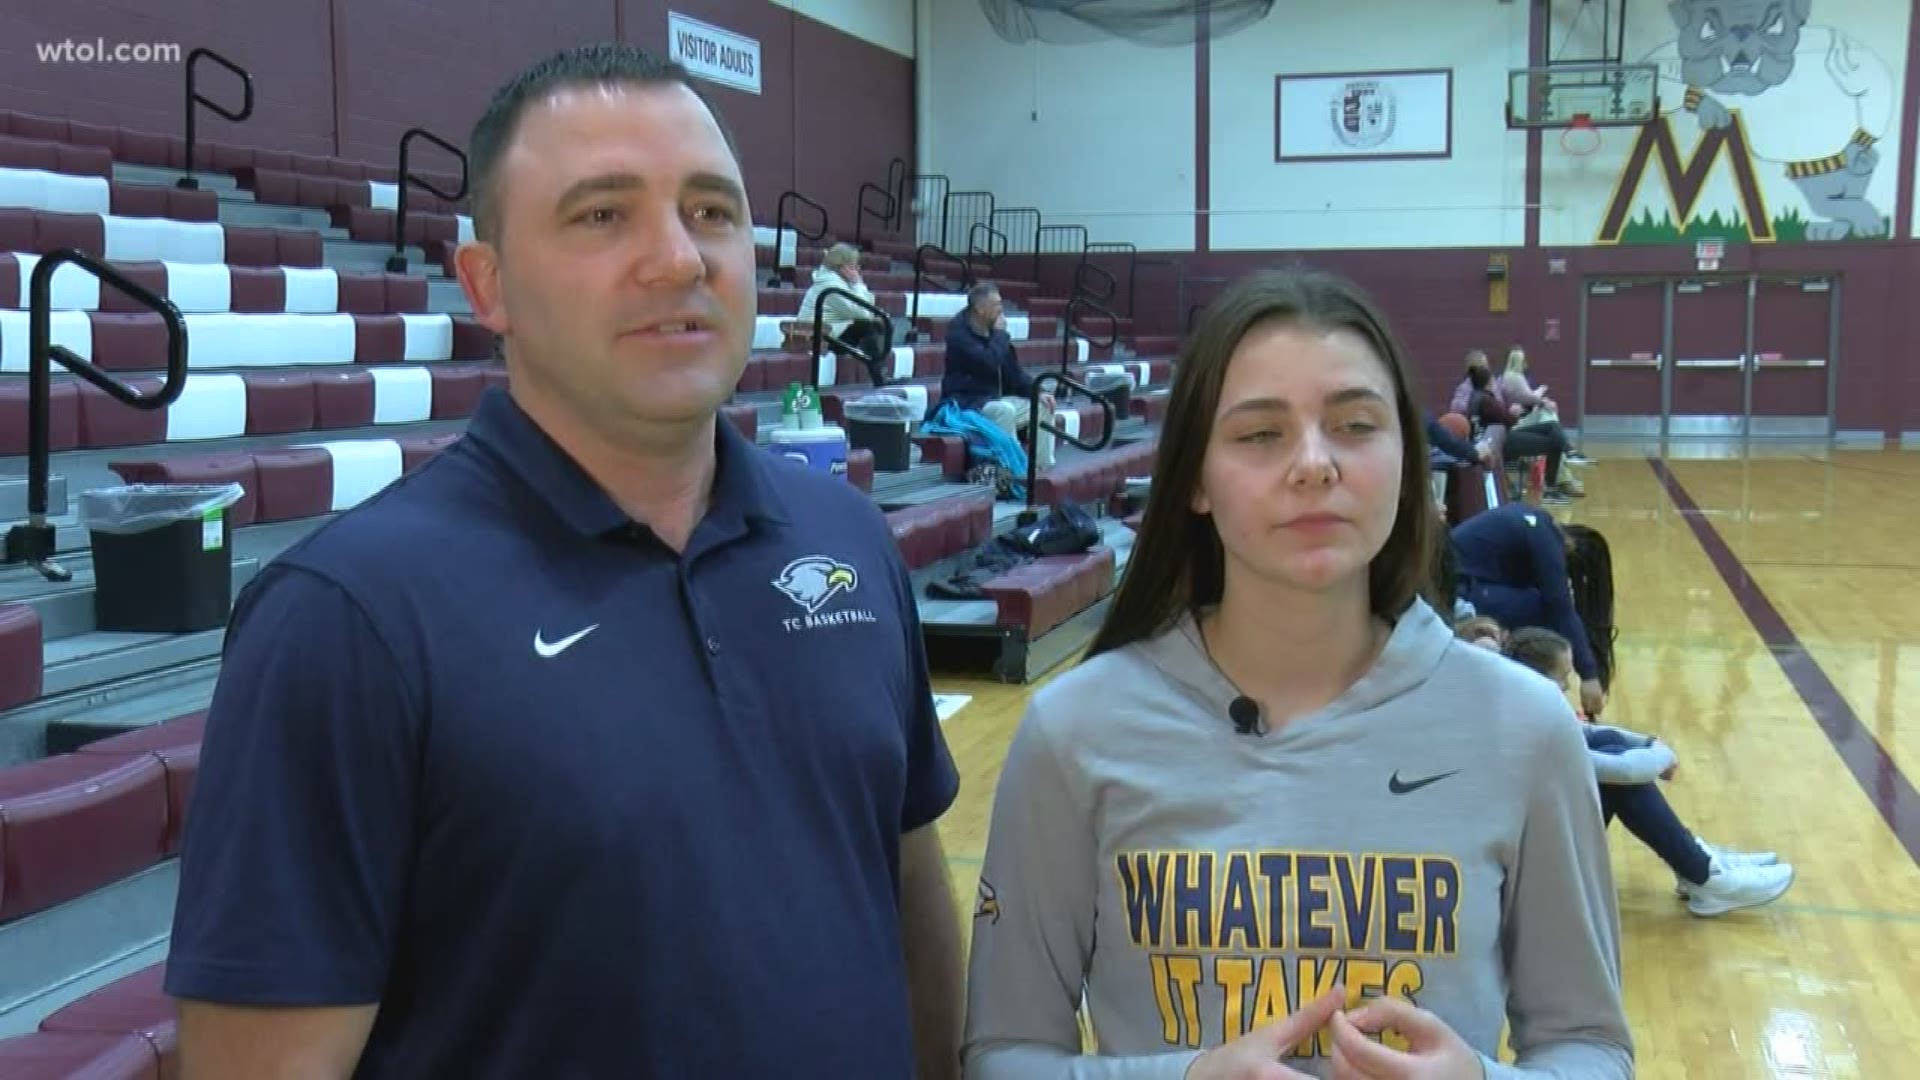 Two local dads, who coach their daughters' basketball teams at Toledo Christian Schools, talked about the bond they share with their children through sports.